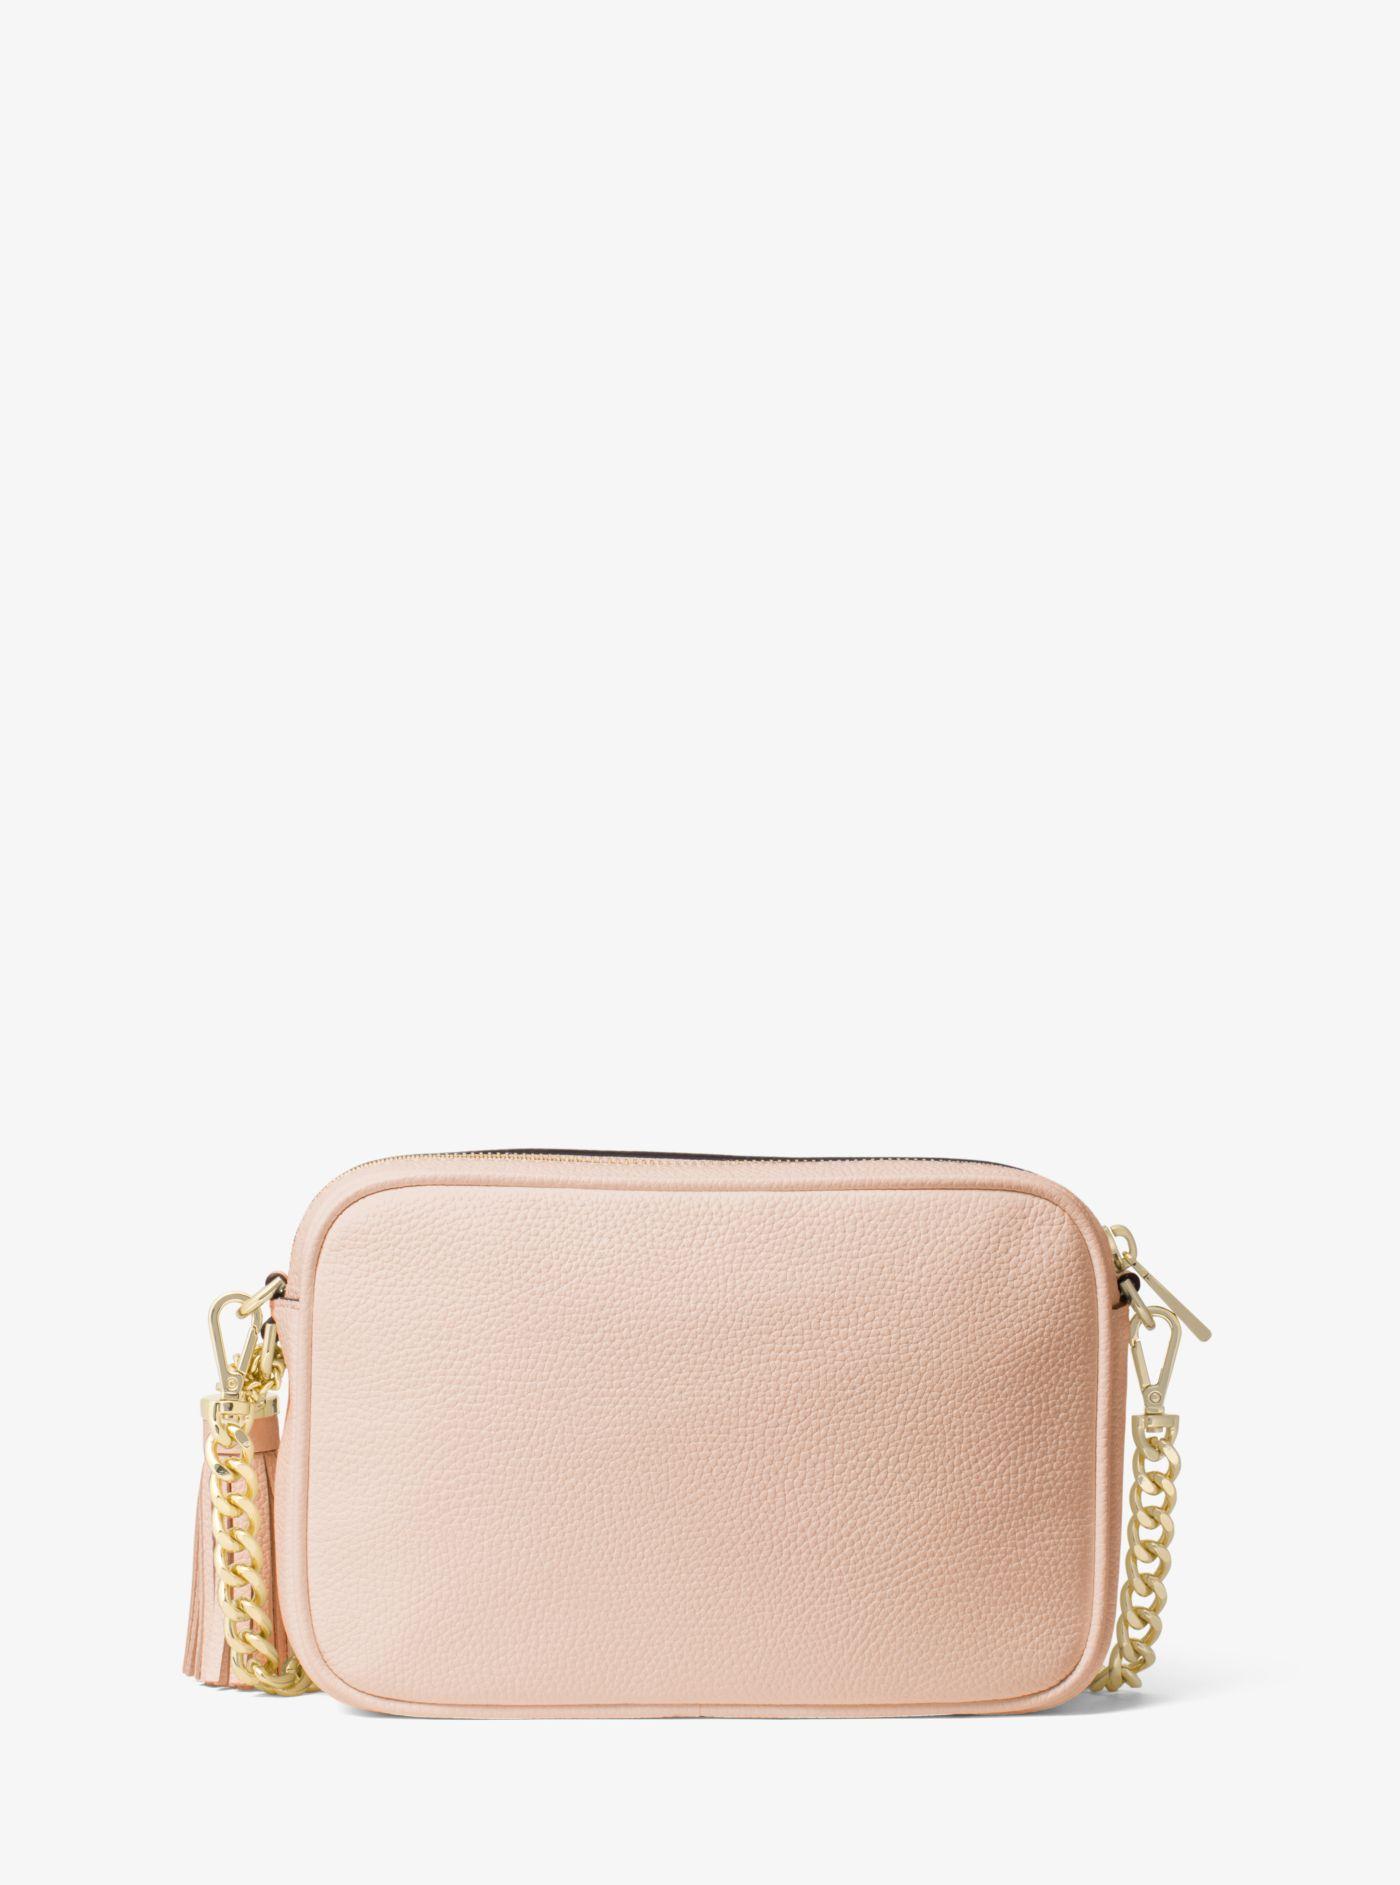 Michael Kors Ginny Leather Crossbody Bag in Pink - Lyst